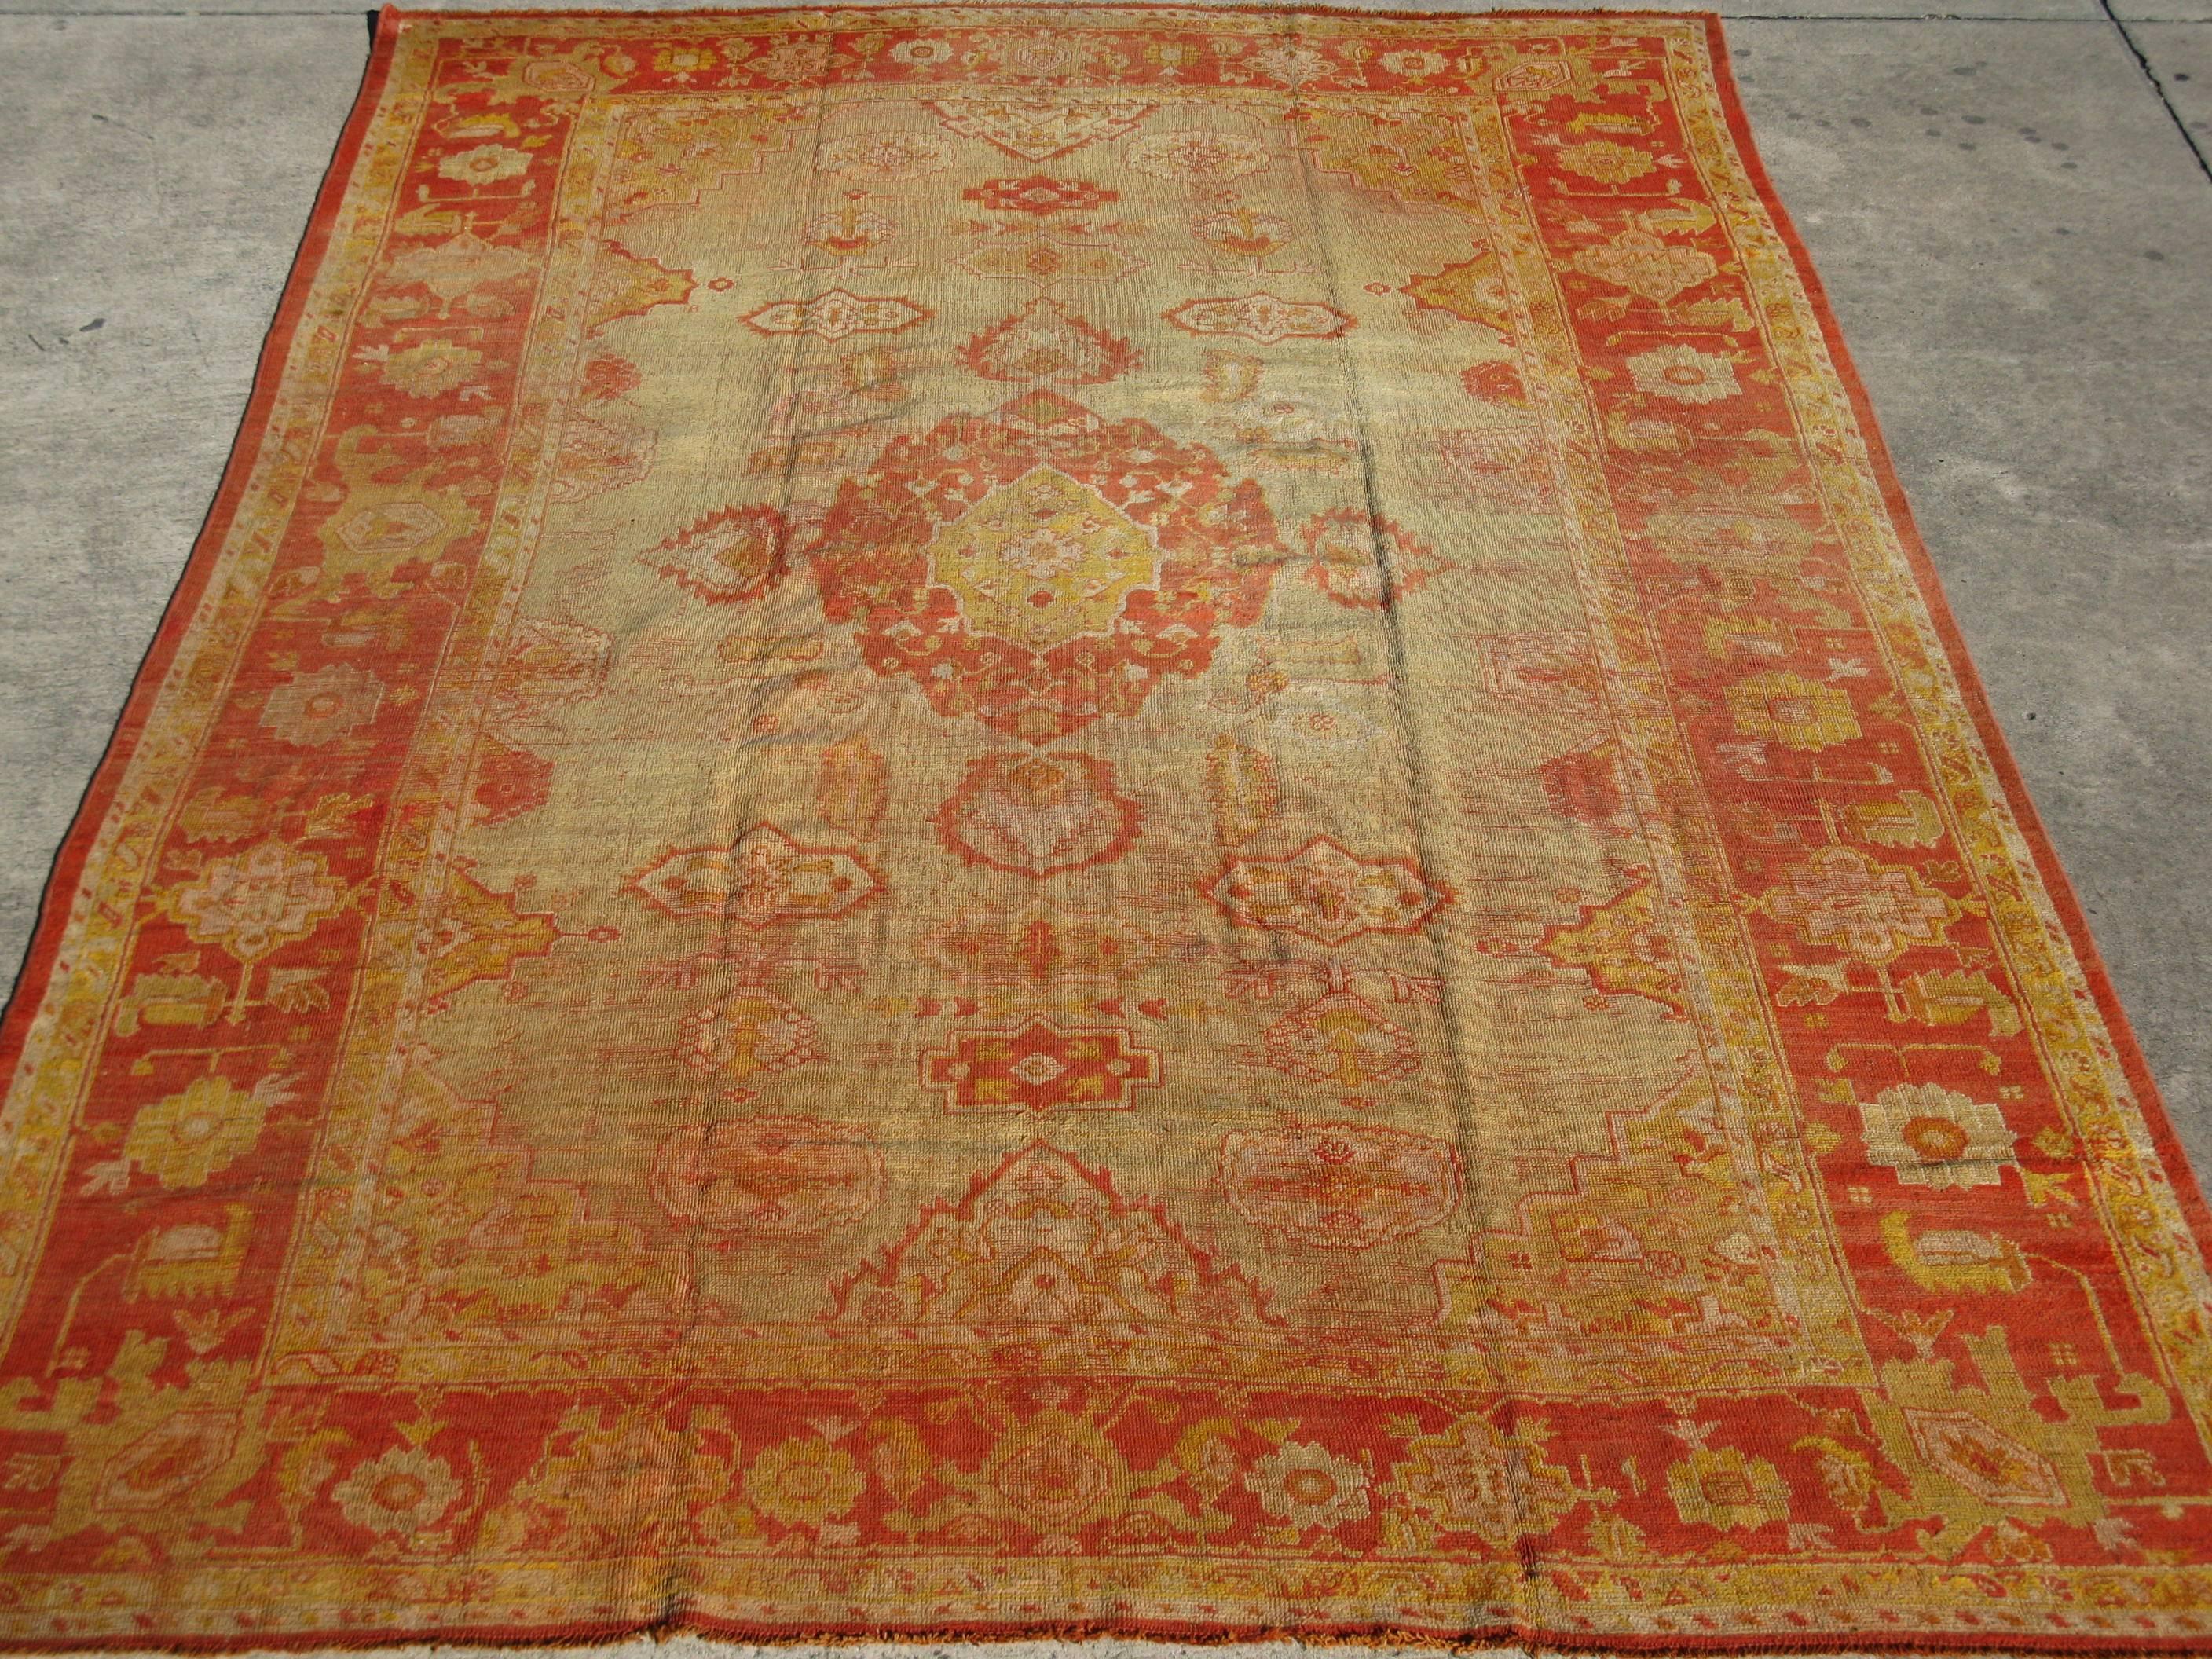 This is a late 19th century antique room size Turkish Oushak rug with rich red color border and pale green field. It measures 9' x 13' 7'' and in very good condition.